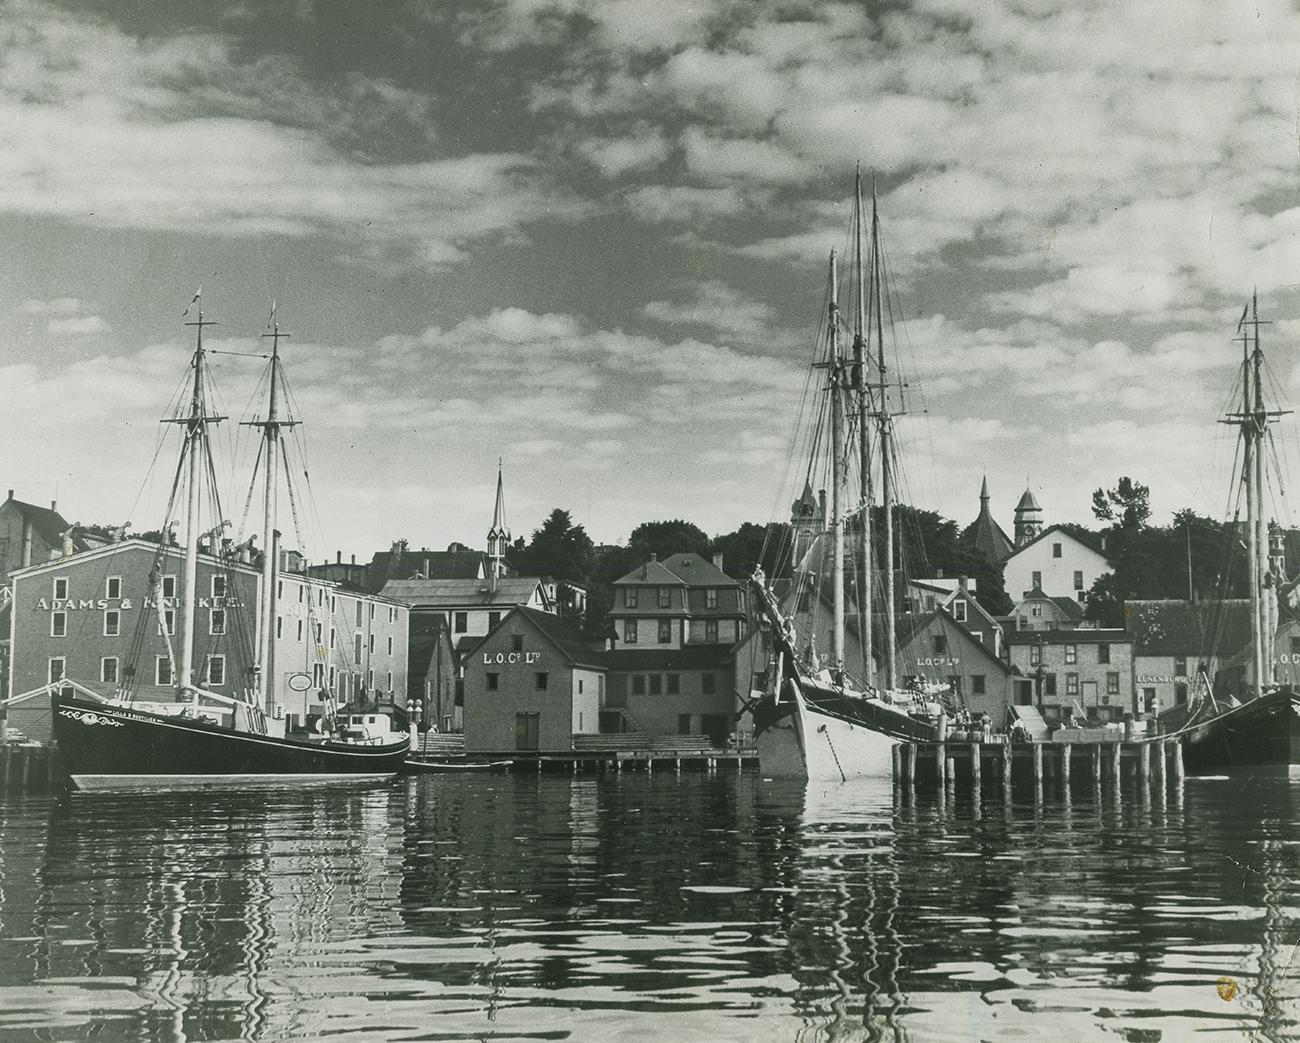 Photo, black and white, waterfront scene of wooden frame buildings and wharf with three sailing ships in dock.